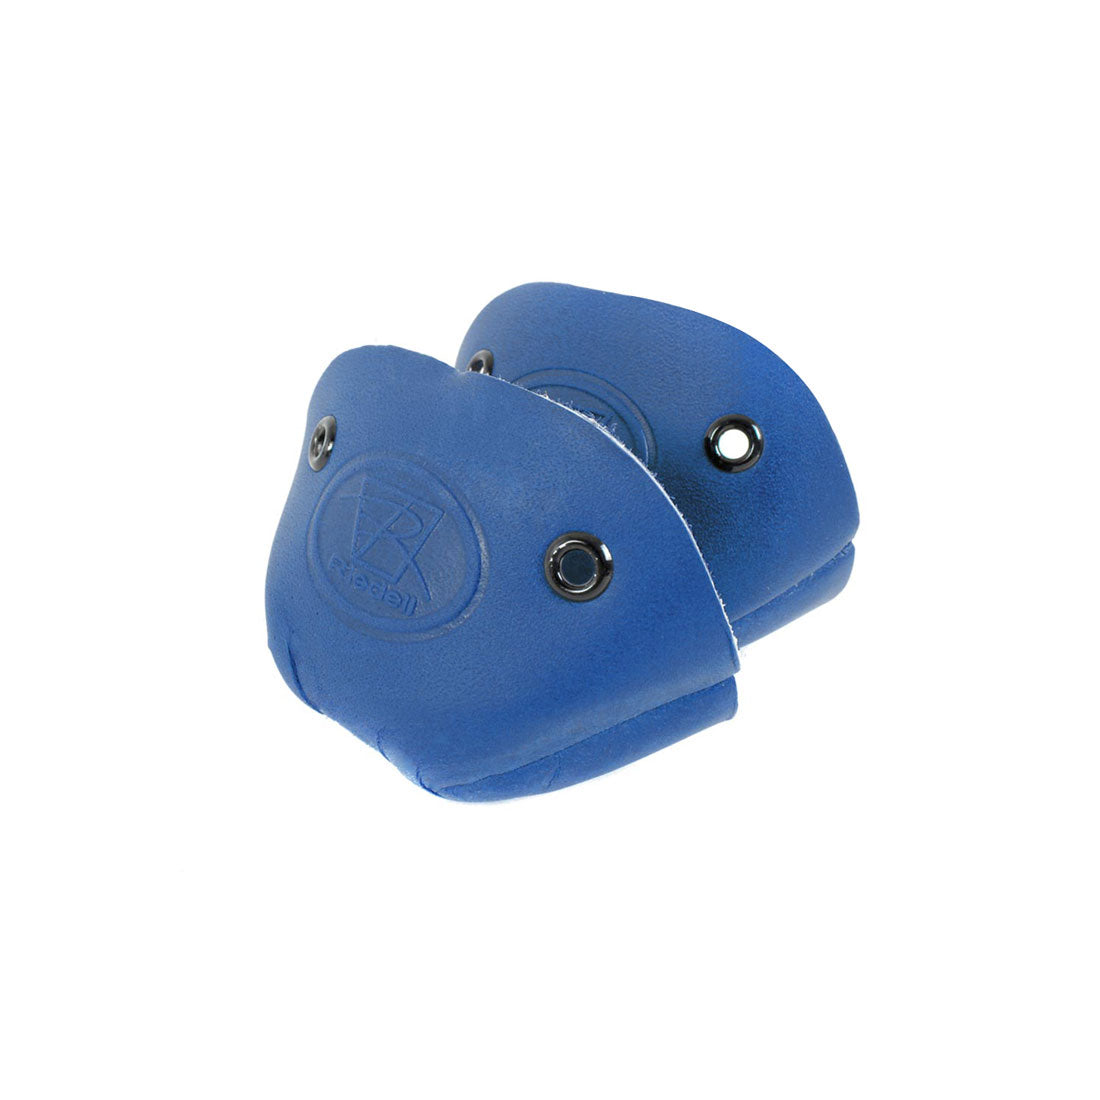 Riedell Toe Cap 2pk - Leather Royal Blue Roller Skate Hardware and Parts